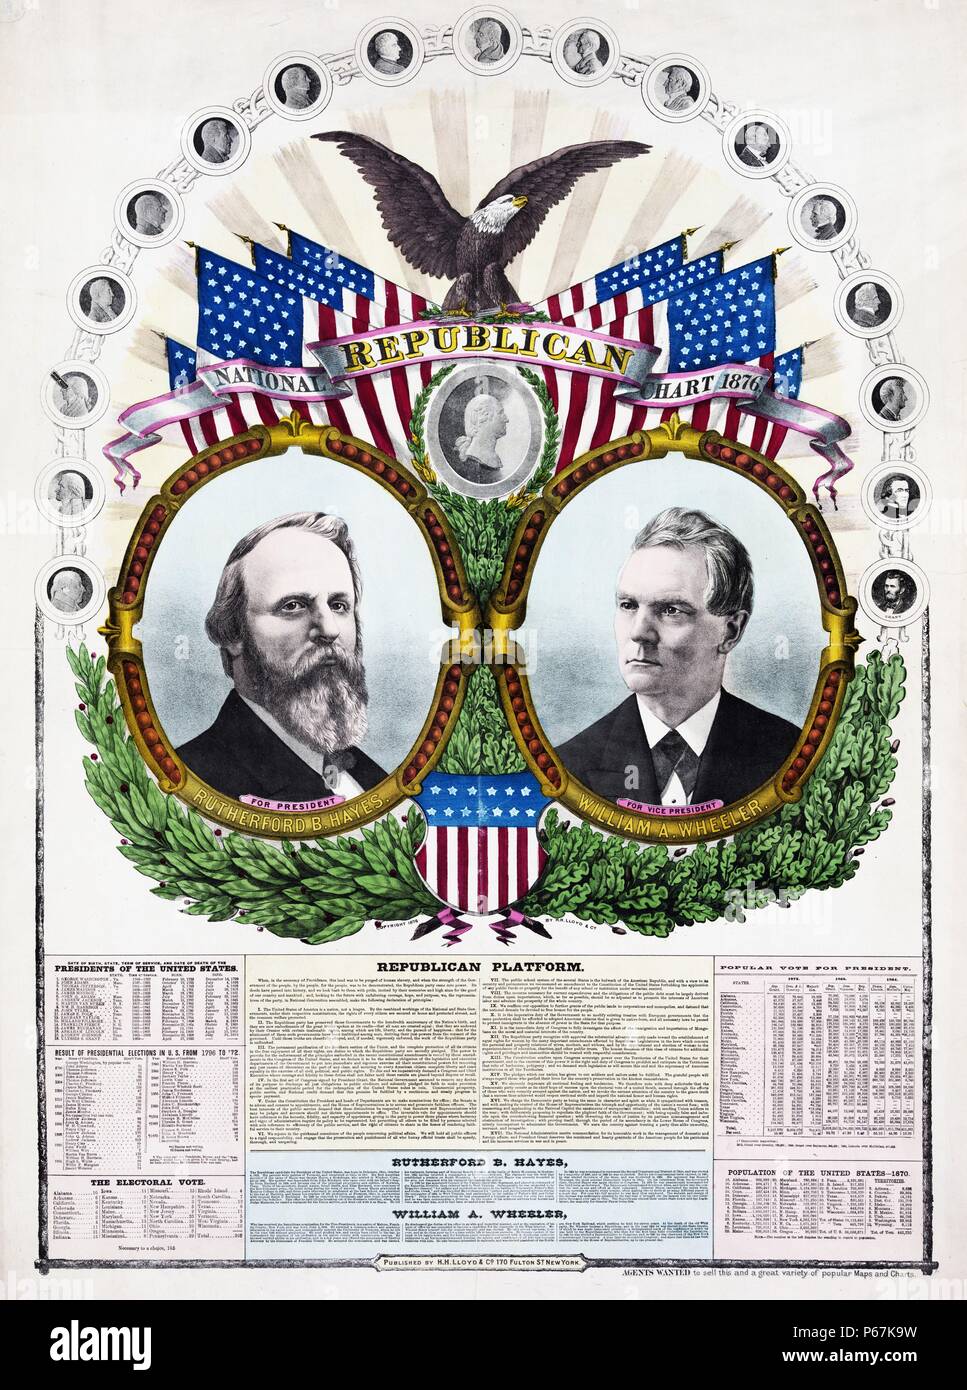 National Republican chart 1876' Print shows Rutherford B. Hayes, facing right, and William A. Wheeler, facing left, bust portraits, with cameo portraits of U.S. presidents from George Washington to Ulysses S. Grant; includes text of the Republican platform, brief biographies of Hayes and Wheeler, and statistical data for past presidential elections. Stock Photo